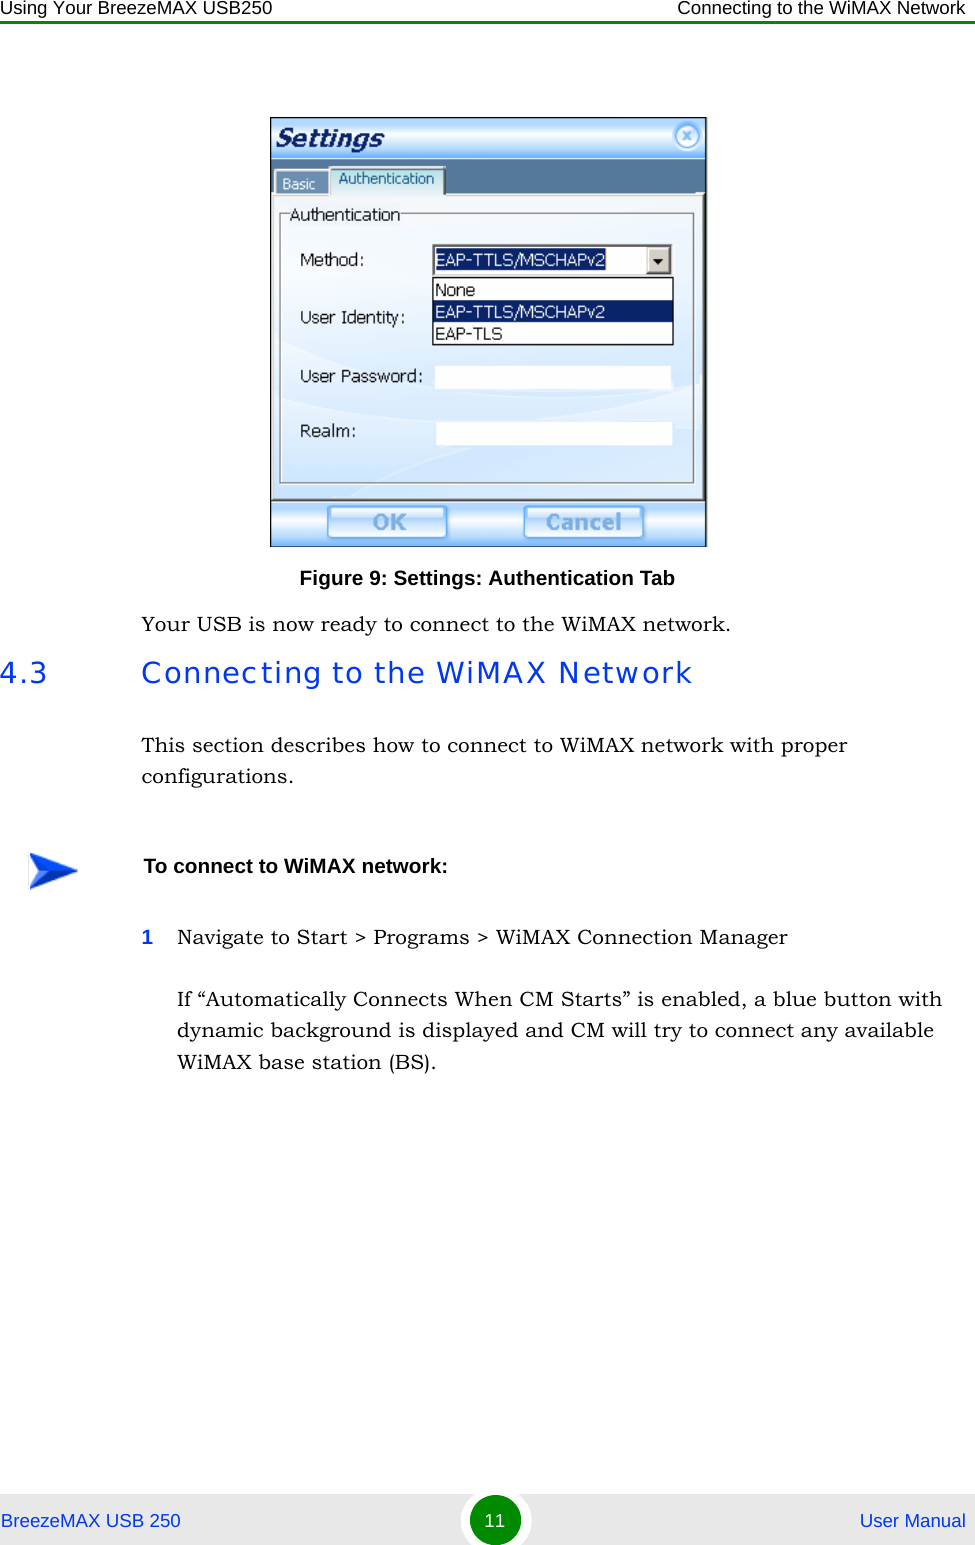 Using Your BreezeMAX USB250 Connecting to the WiMAX NetworkBreezeMAX USB 250 11  User ManualYour USB is now ready to connect to the WiMAX network.4.3 Connecting to the WiMAX NetworkThis section describes how to connect to WiMAX network with proper configurations.1Navigate to Start &gt; Programs &gt; WiMAX Connection ManagerIf “Automatically Connects When CM Starts” is enabled, a blue button with dynamic background is displayed and CM will try to connect any available WiMAX base station (BS).Figure 9: Settings: Authentication TabTo connect to WiMAX network: